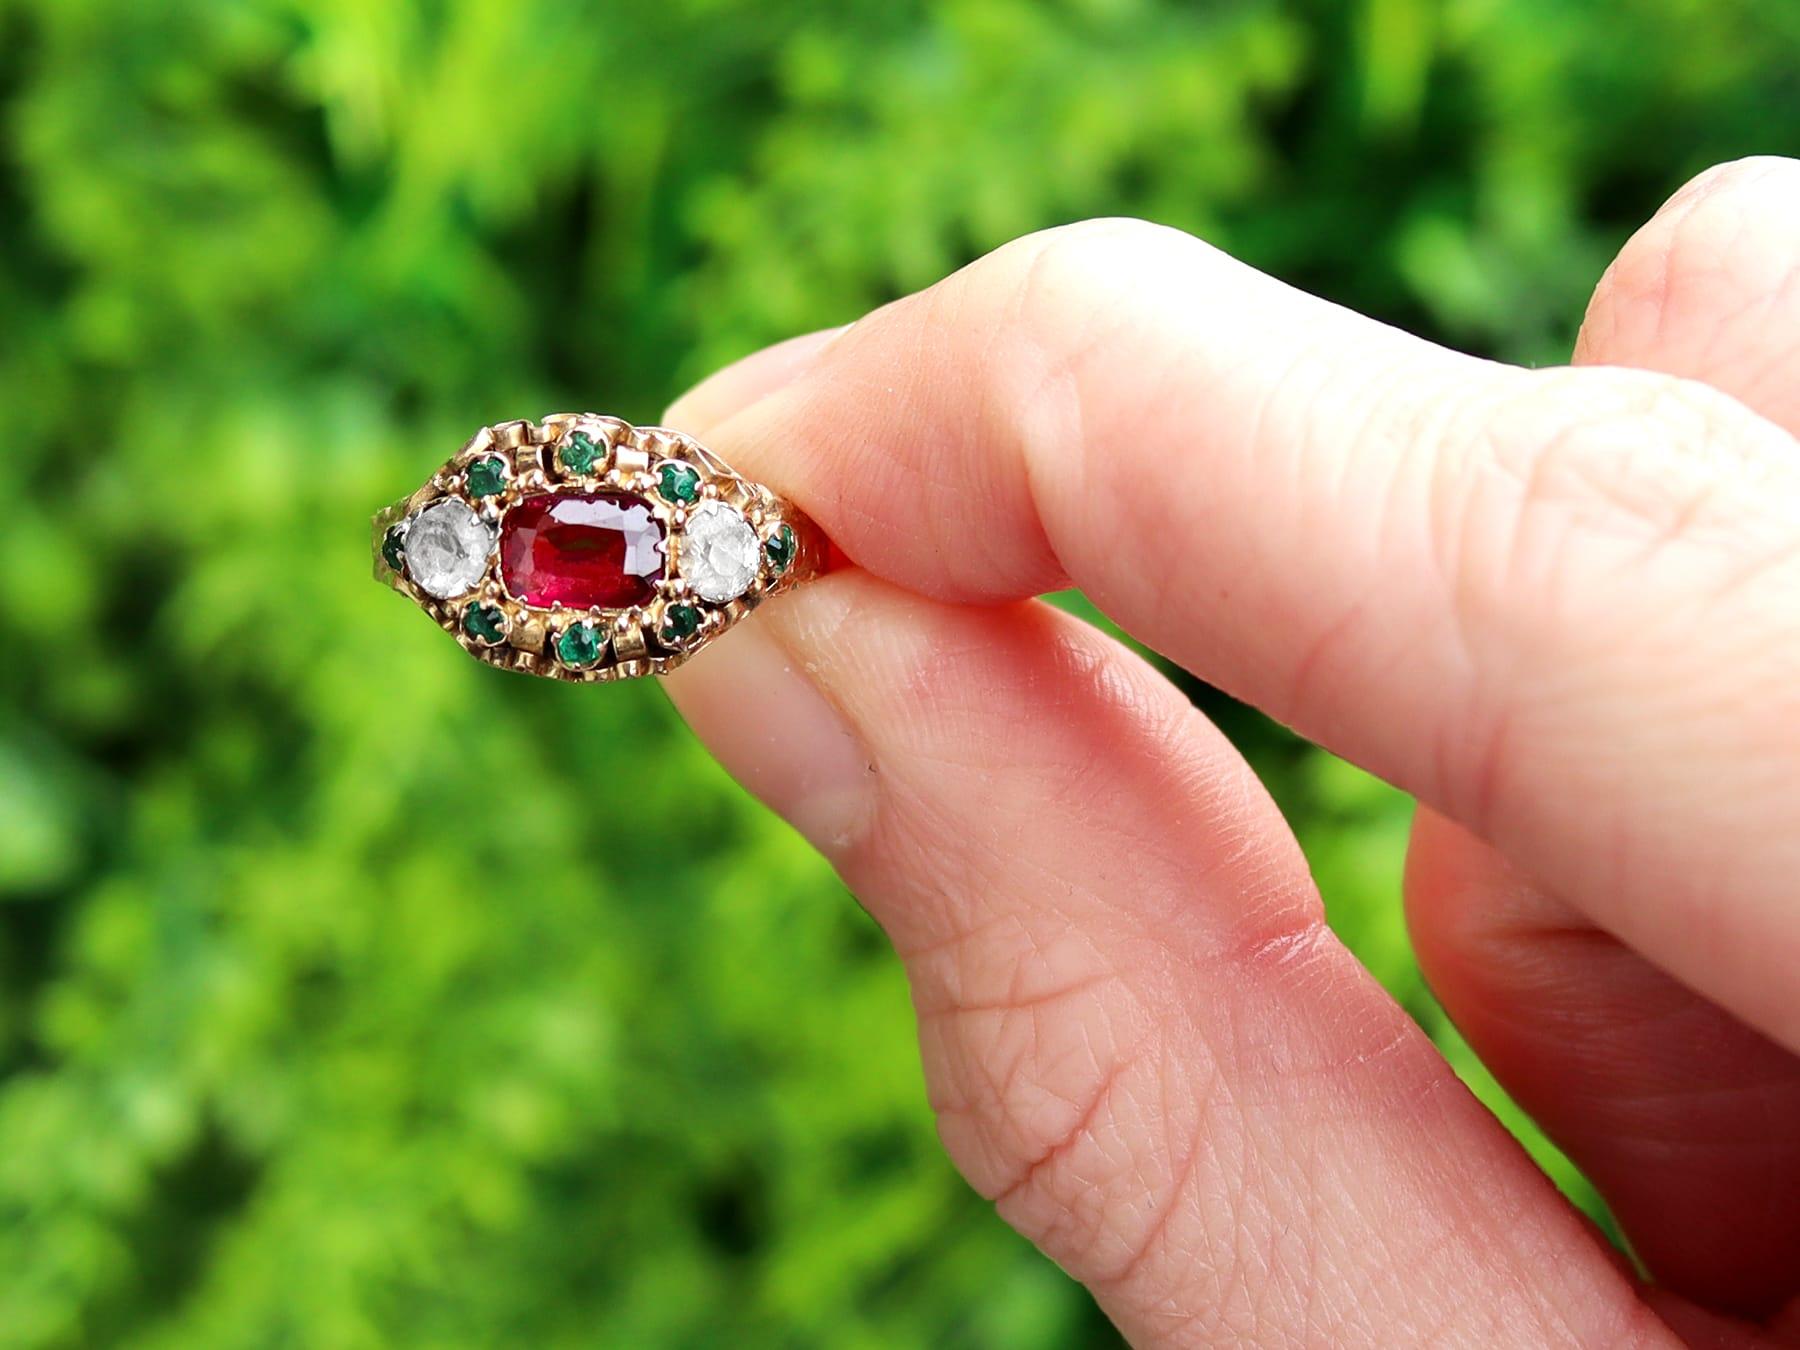 A fine and impressive antique Victorian white, green and red paste, 15 karat yellow gold cannetille style dress ring; part of our diverse antique jewelry collections.

This fine and impressive antique paste ring has been crafted in 15k yellow